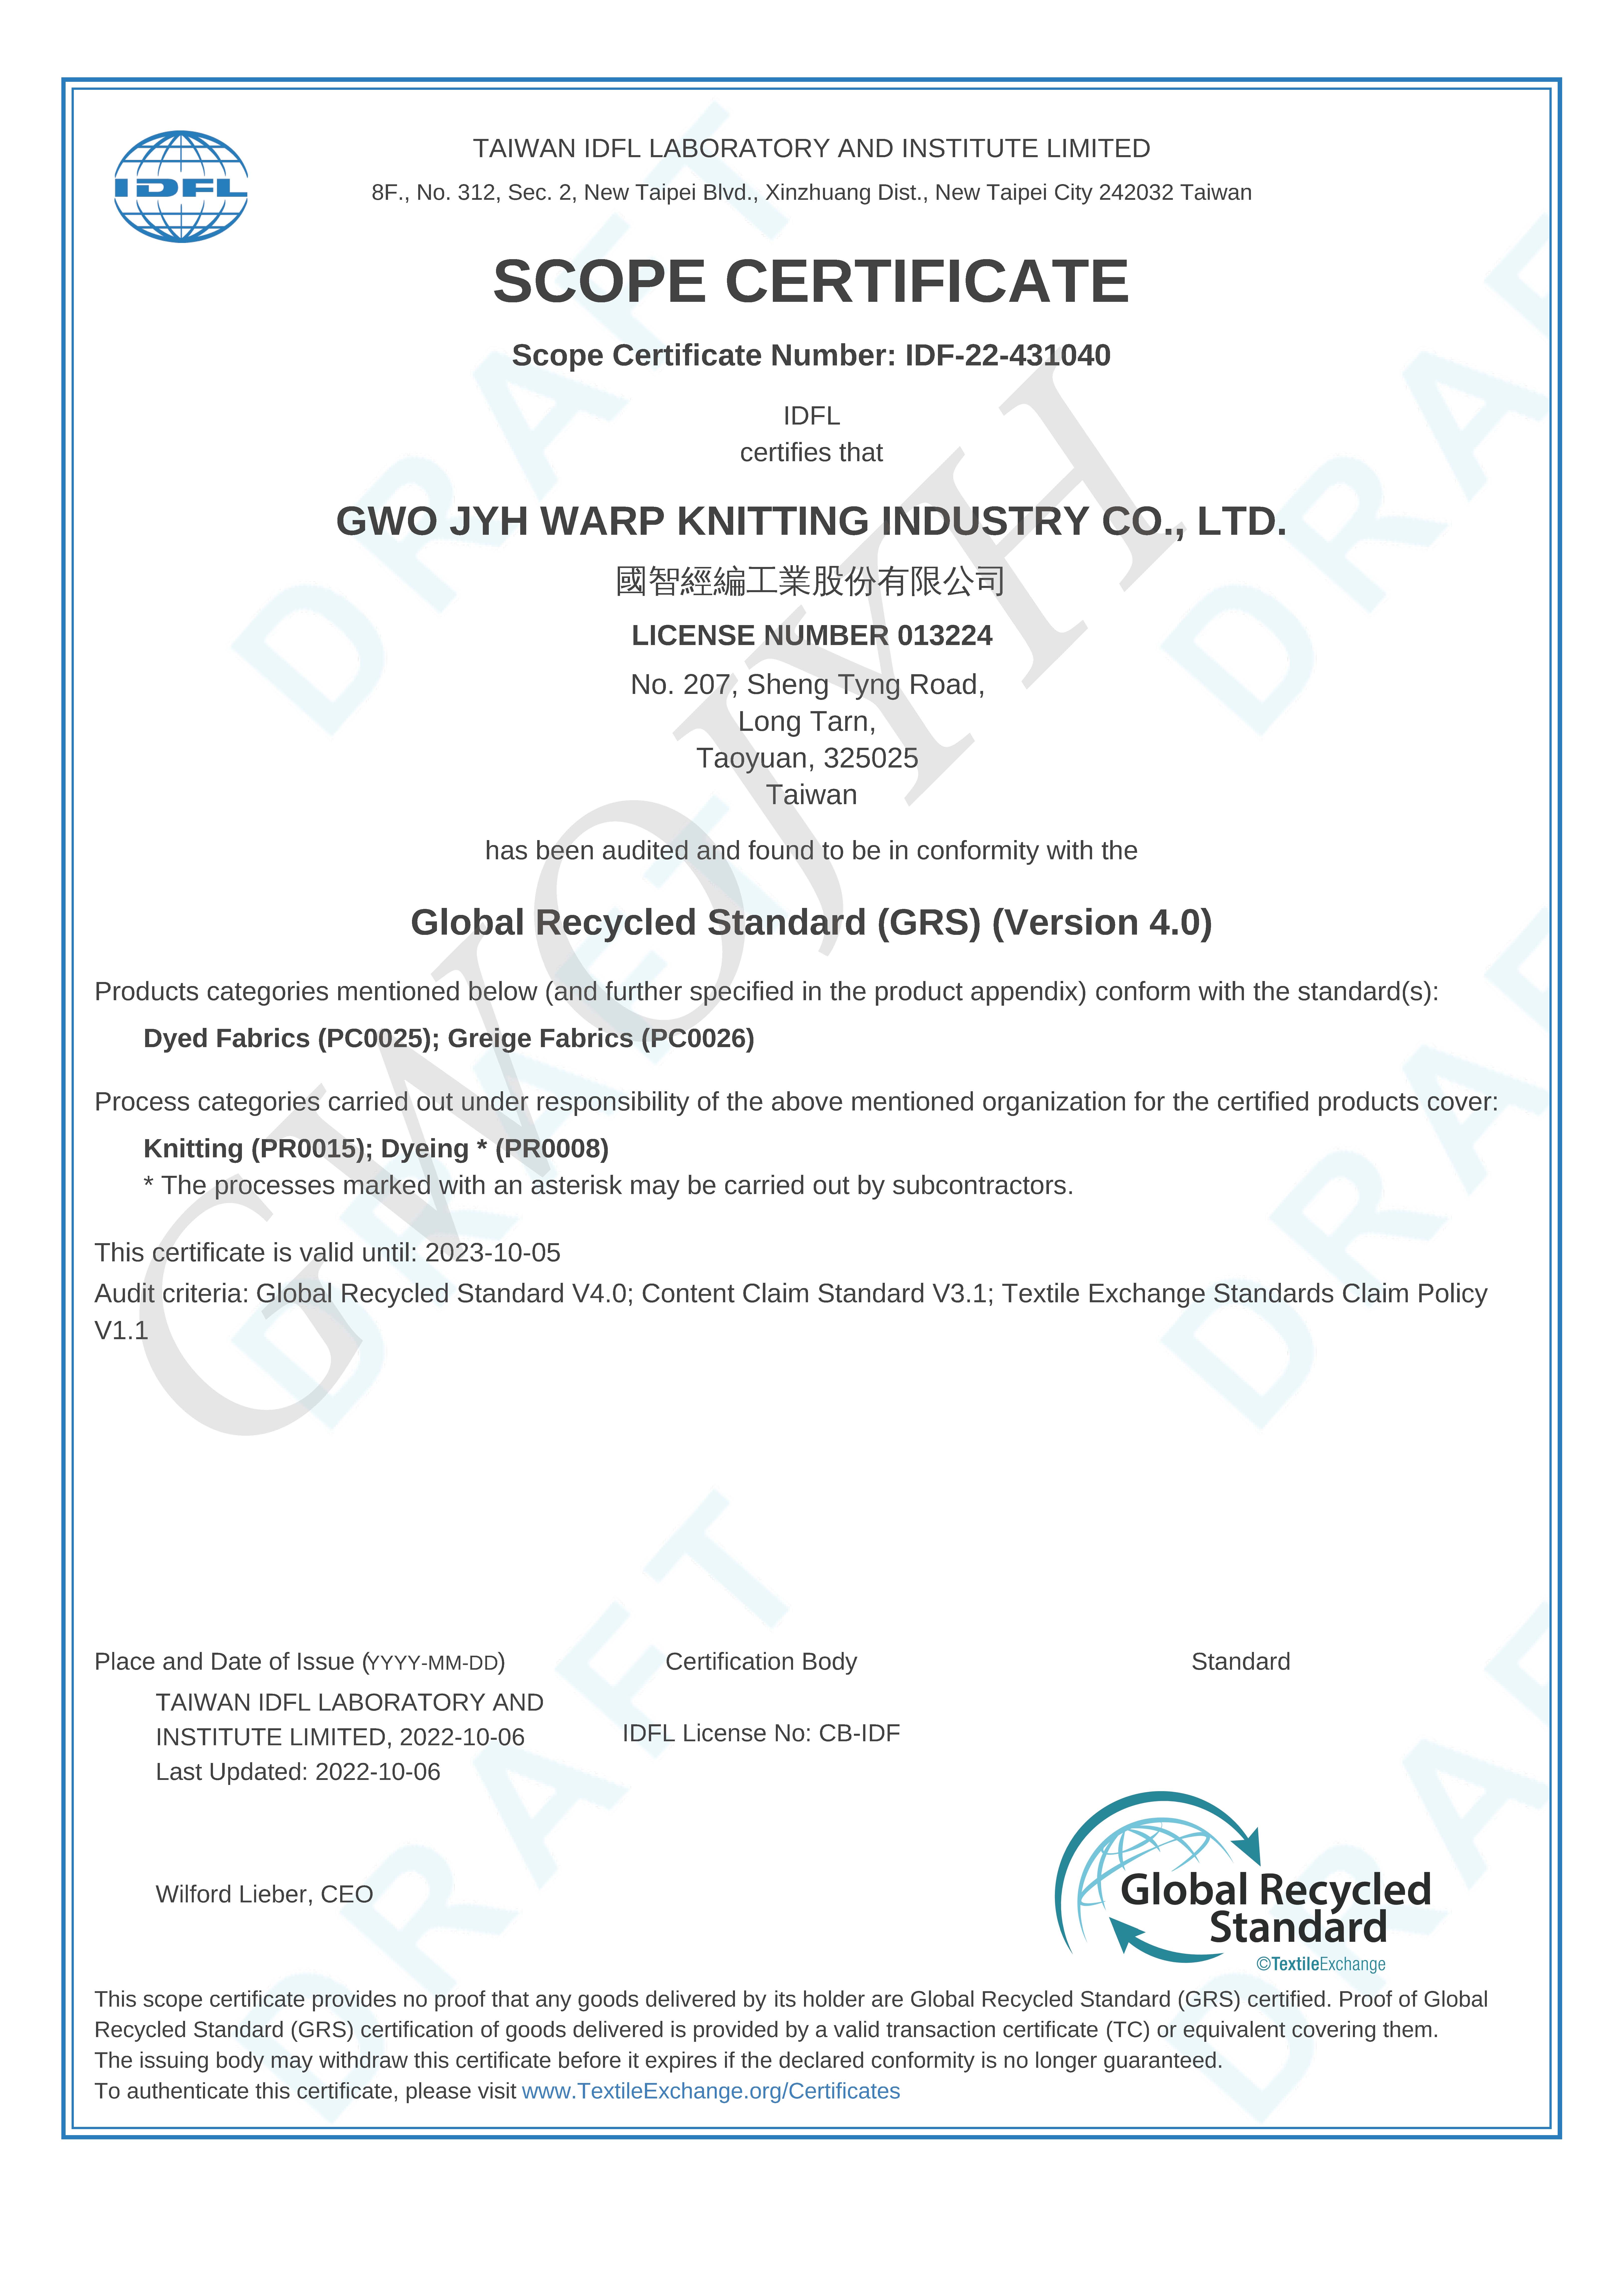 2022-GWO JYH has been qualified the Global Recycled Standard certificate and become one part of the international green suppliers.